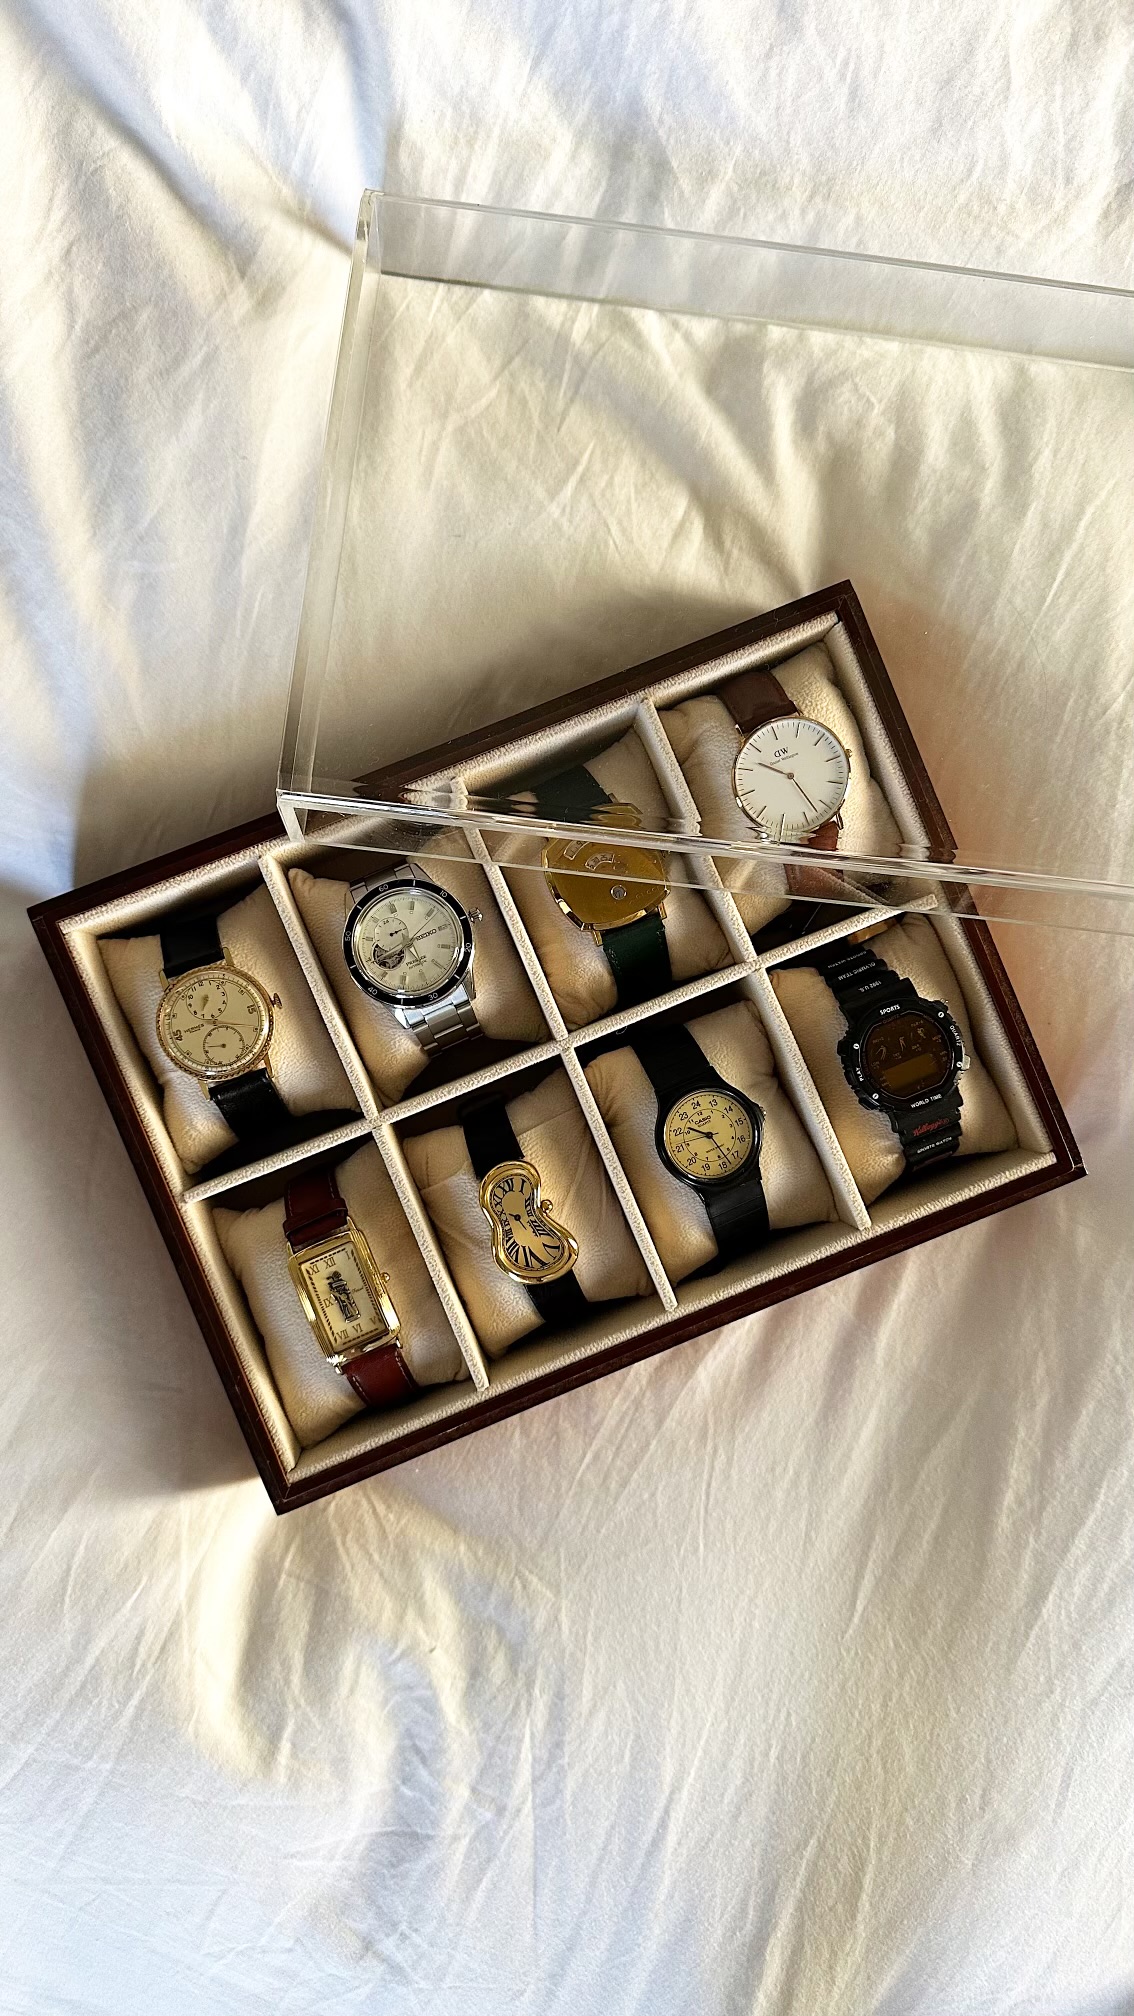 Nathan's watch collection of eight different watches.